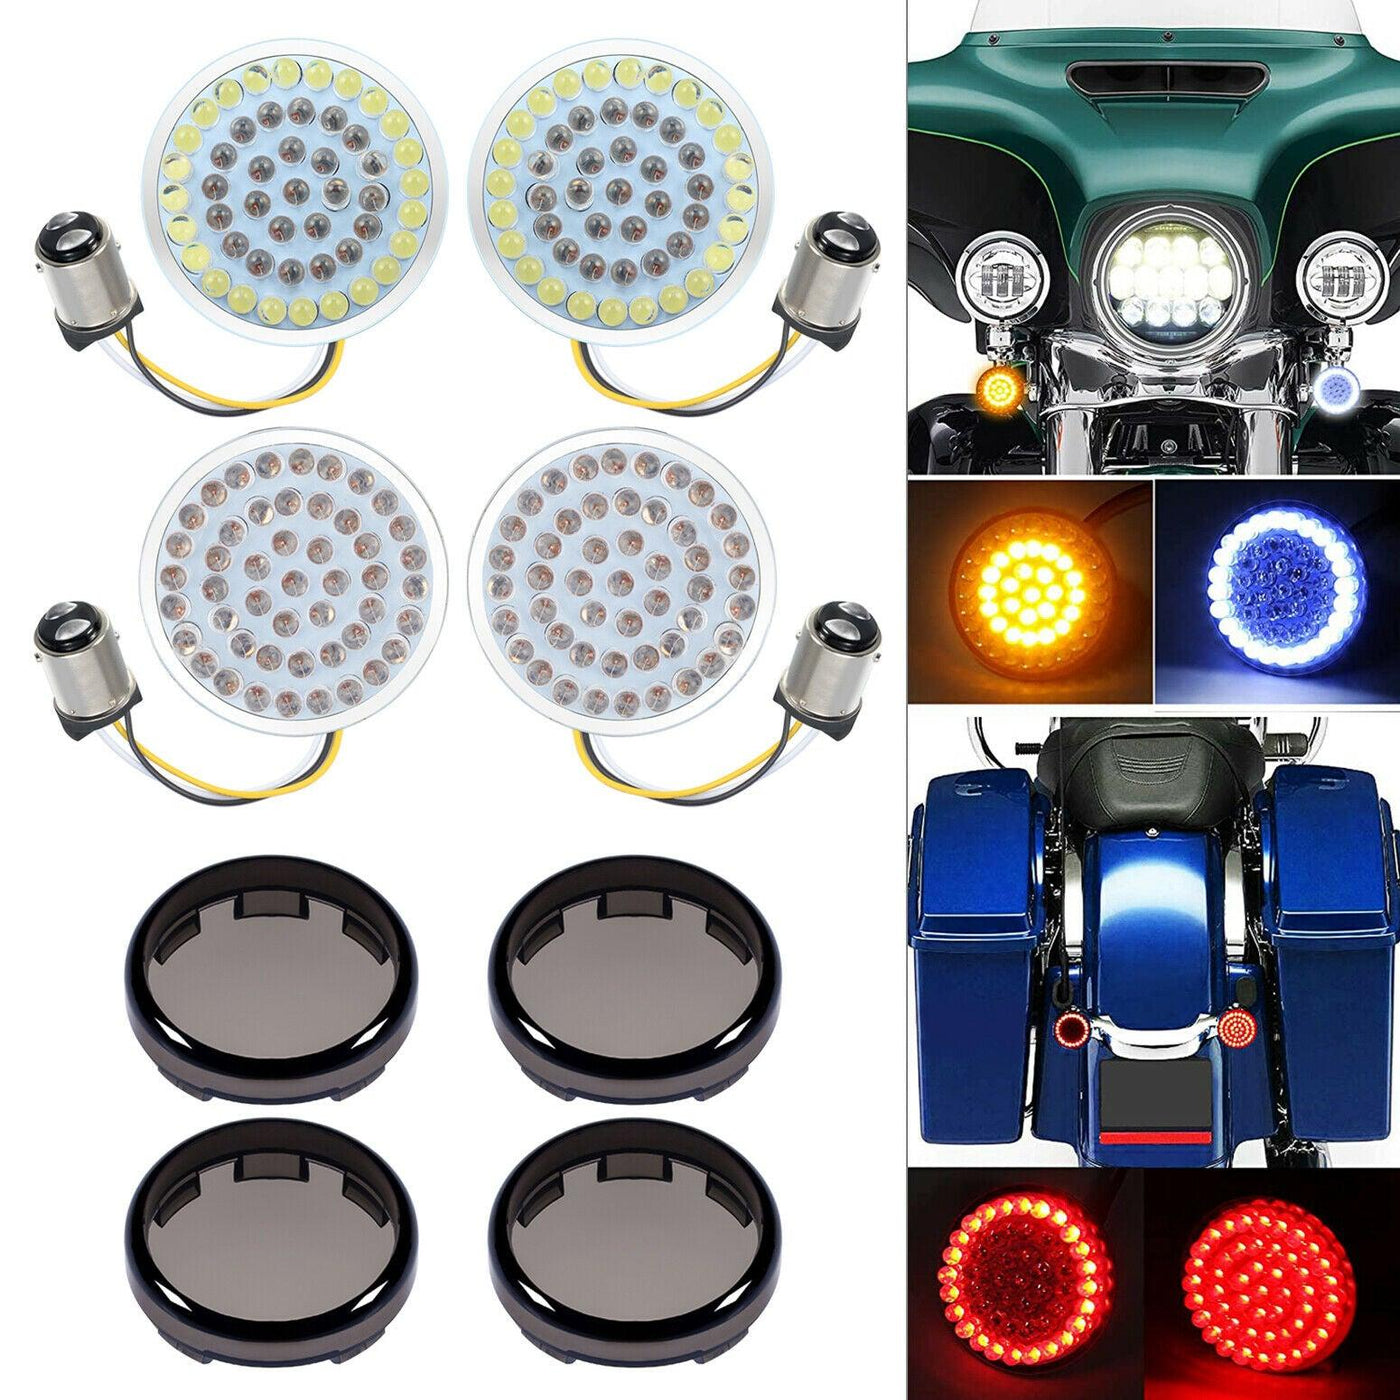 2" 1157 LED Bullet Turn Signals Light Inserts Smoke Lens Cover Fit for Harley - Moto Life Products